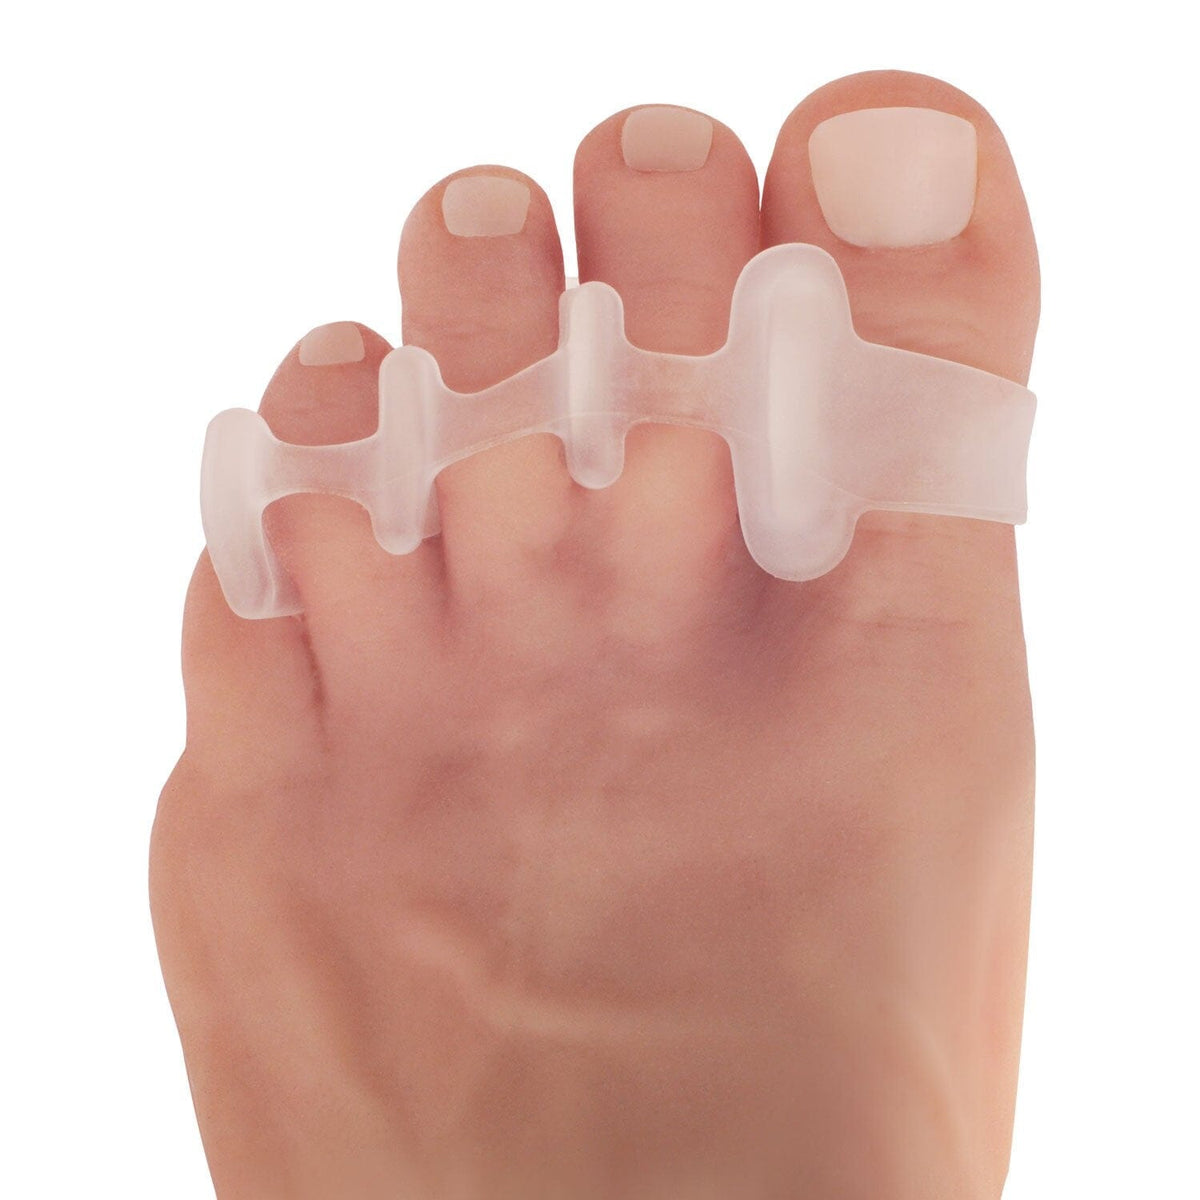 Dr. Frederick’s Original Gel Toe Spreaders - 2pcs- Gel Toe Spacers - Bunion Toe Separators - Temporary Bunion Corrector - Gel Orthotic for Overlapping Toes - For Men/Women - One Size Foot Pain Dr. Frederick&#39;s Original 